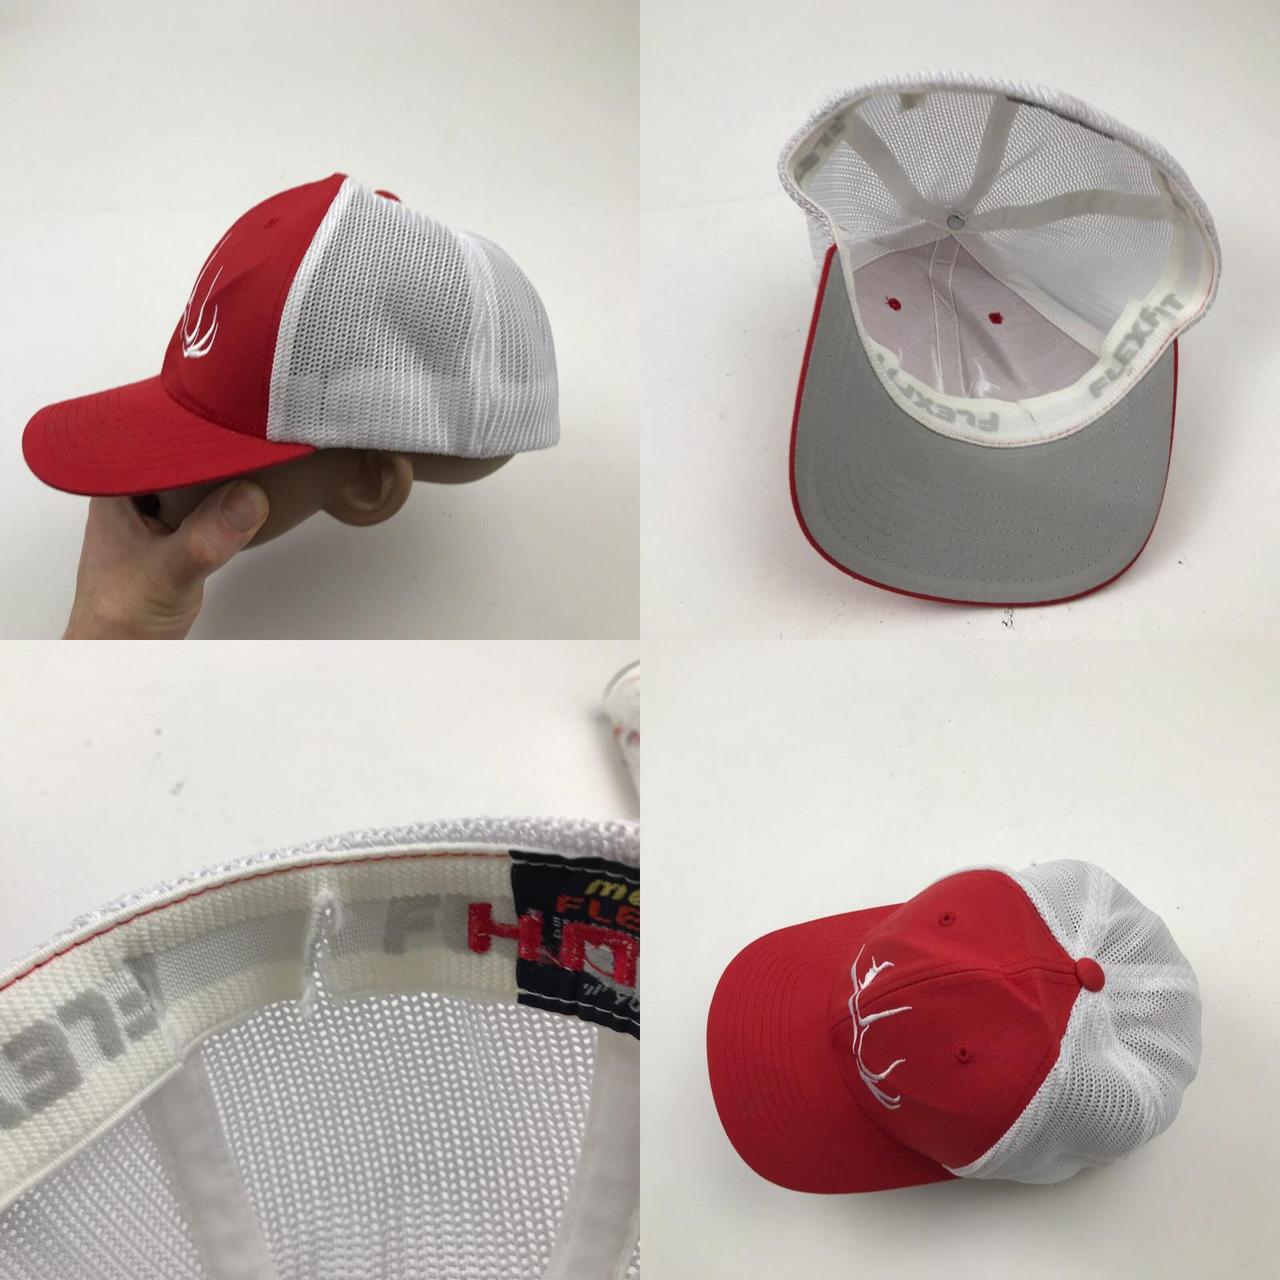 Hush Men's Red and White Hat (4)